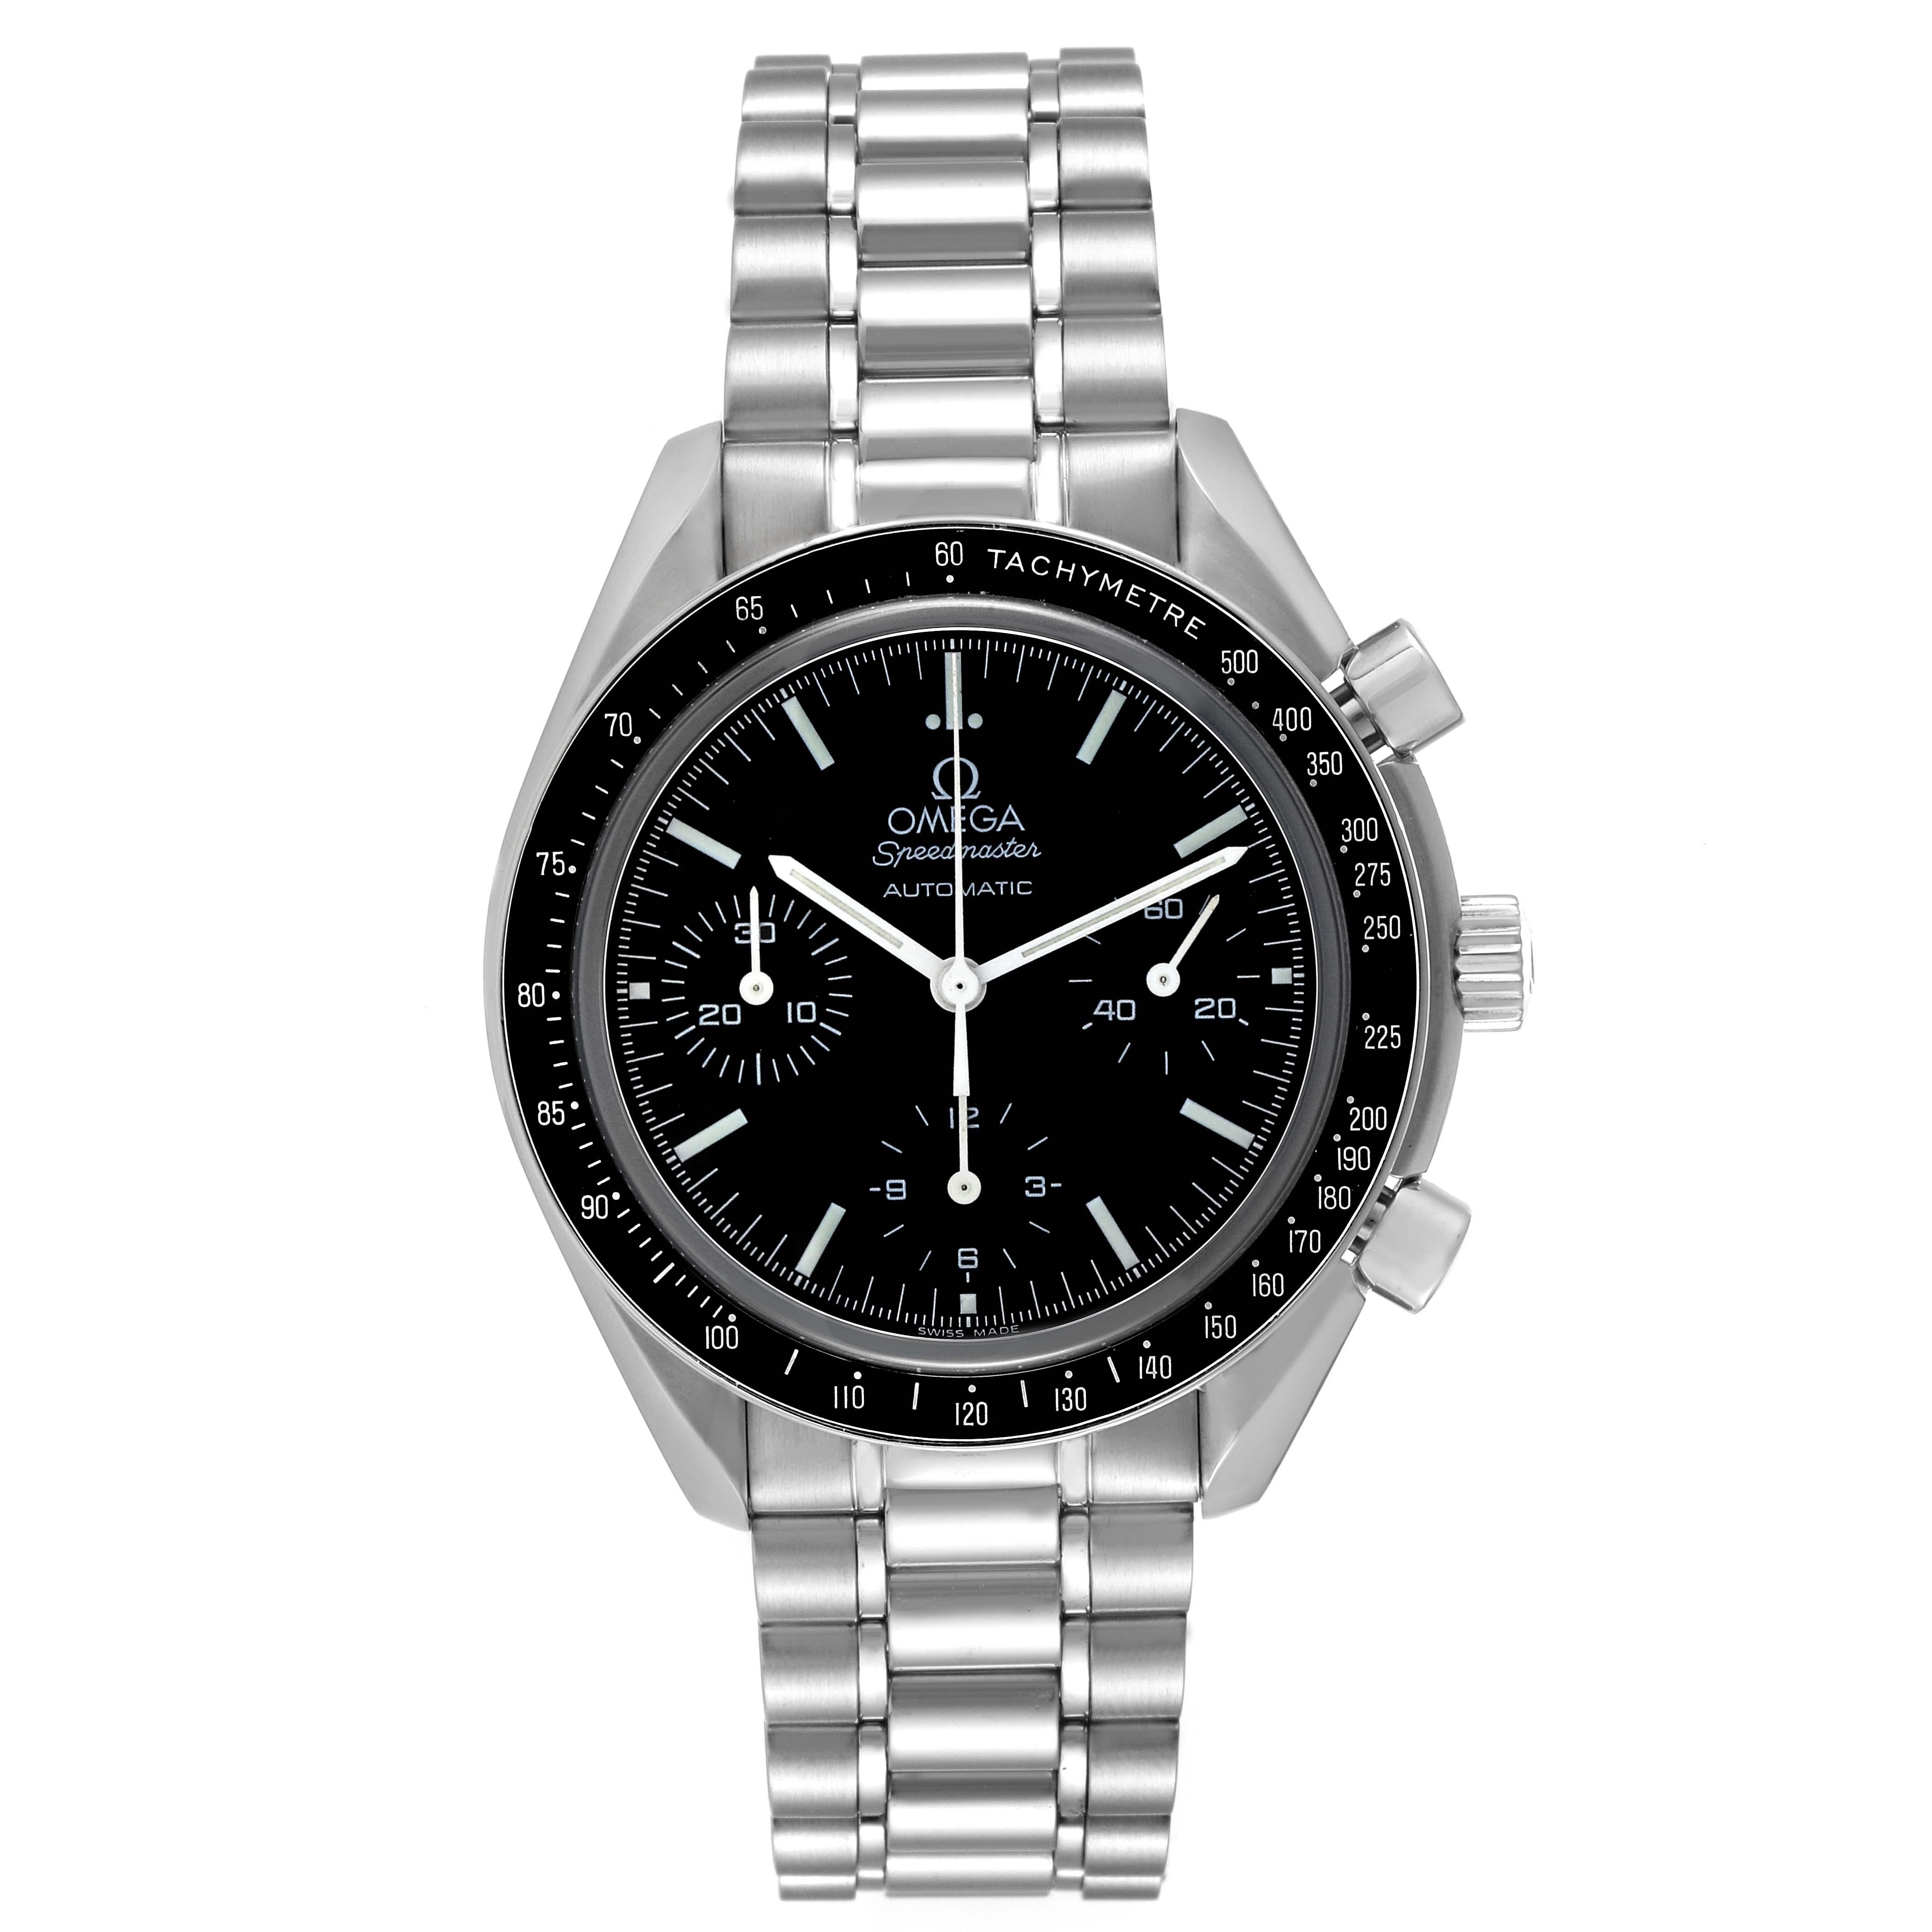 Omega Speedmaster Reduced Chronograph Steel Mens Watch 3539.50.00 Card. Automatic self-winding chronograph movement. Stainless steel round case 39.0 mm in diameter. Stainless steel bezel with tachymeter function. Scratch resistant sapphire crystal.